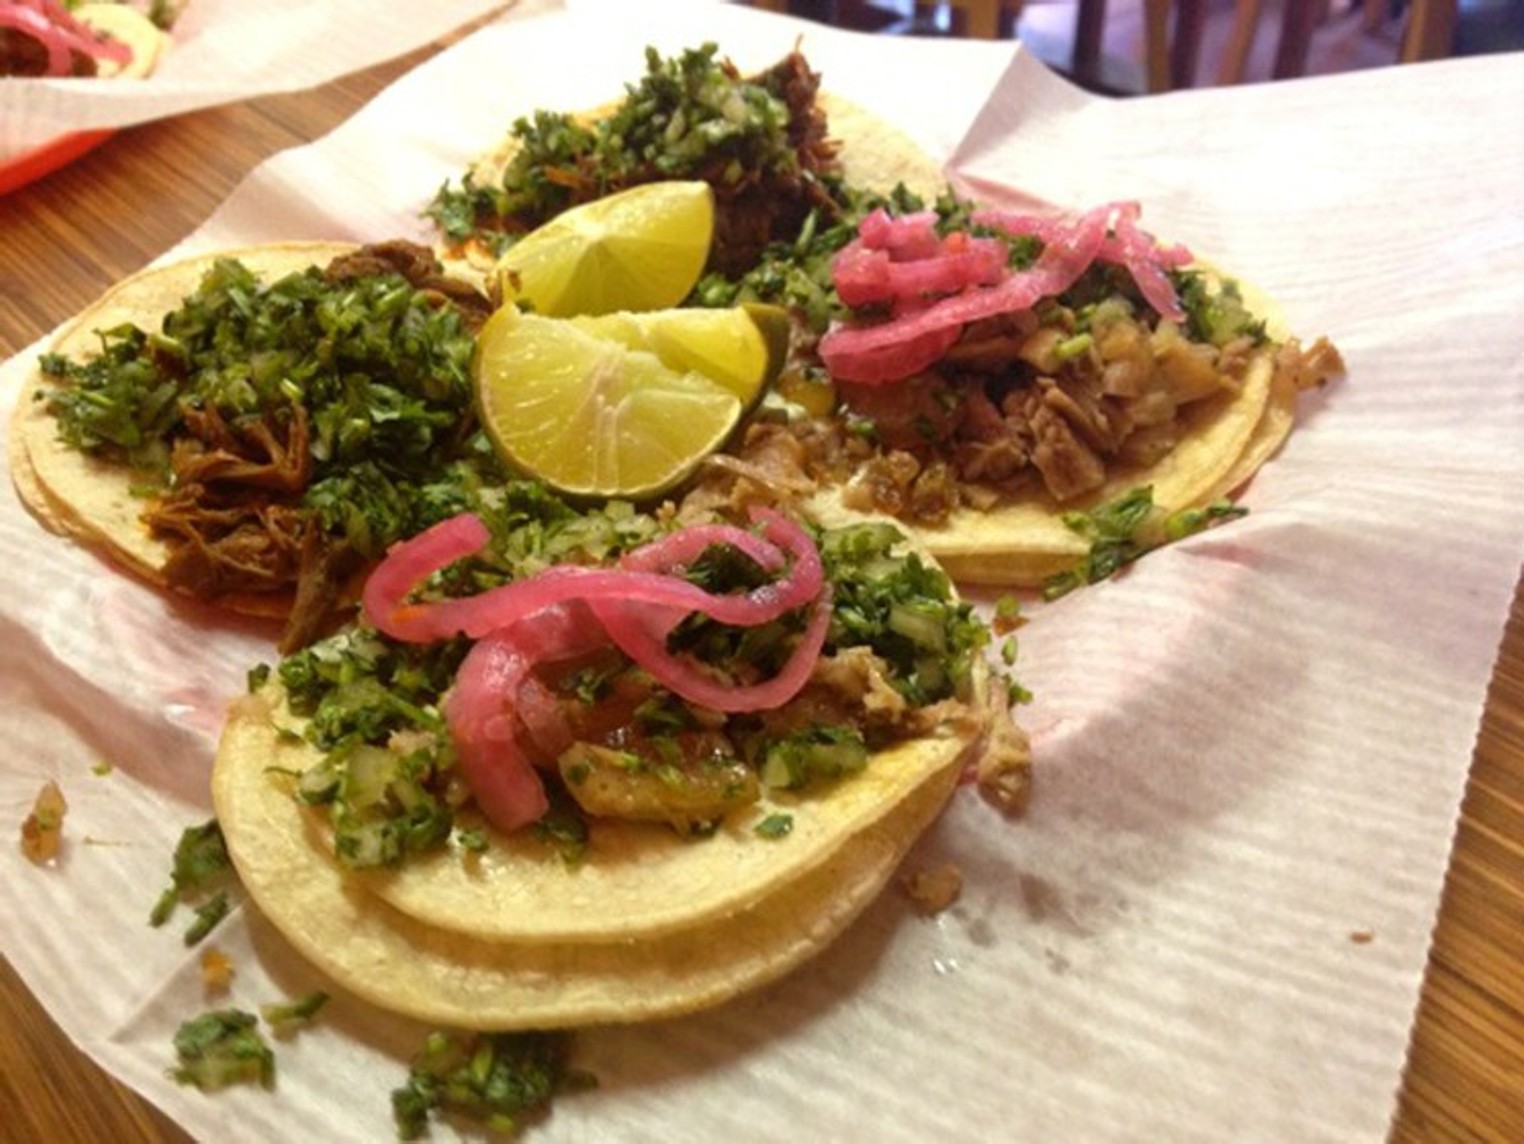 Best Tacos 2019 La Calle Taqueria y Carnitas Best of Denver® Best Restaurants, Bars, Clubs, Music and Stores in Denver Westword photo